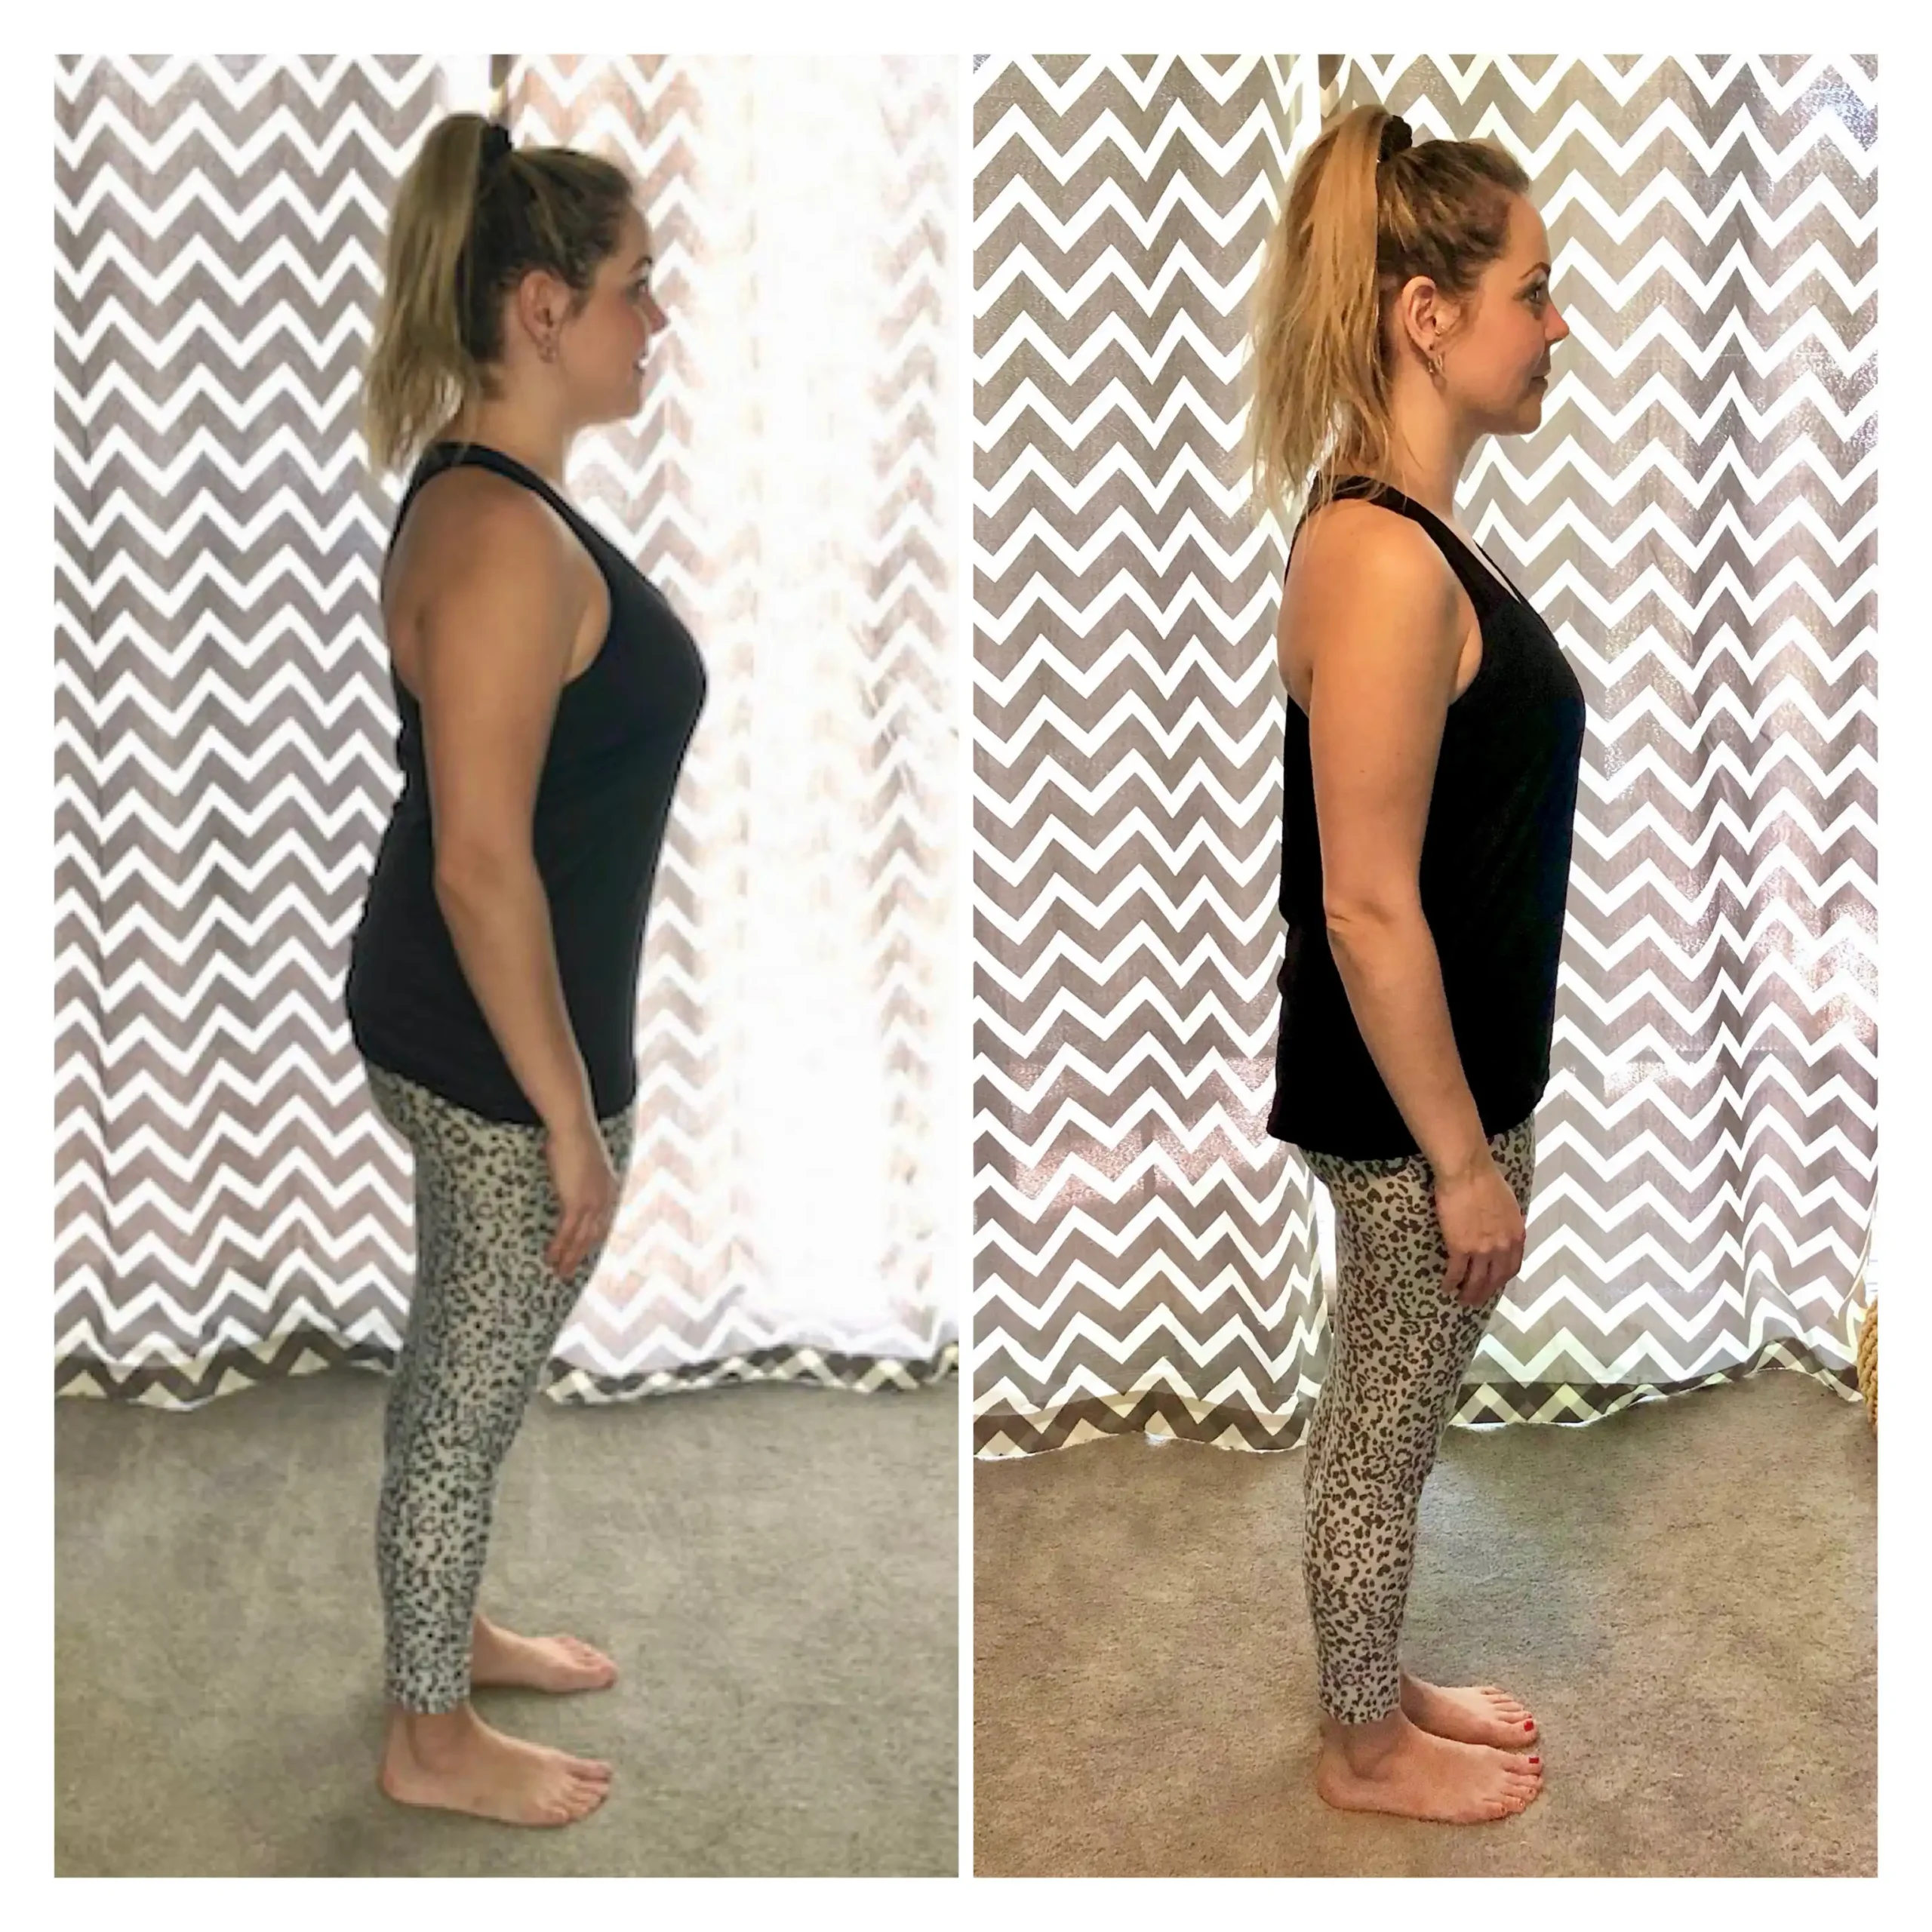 Sarah before and after weight loss side view